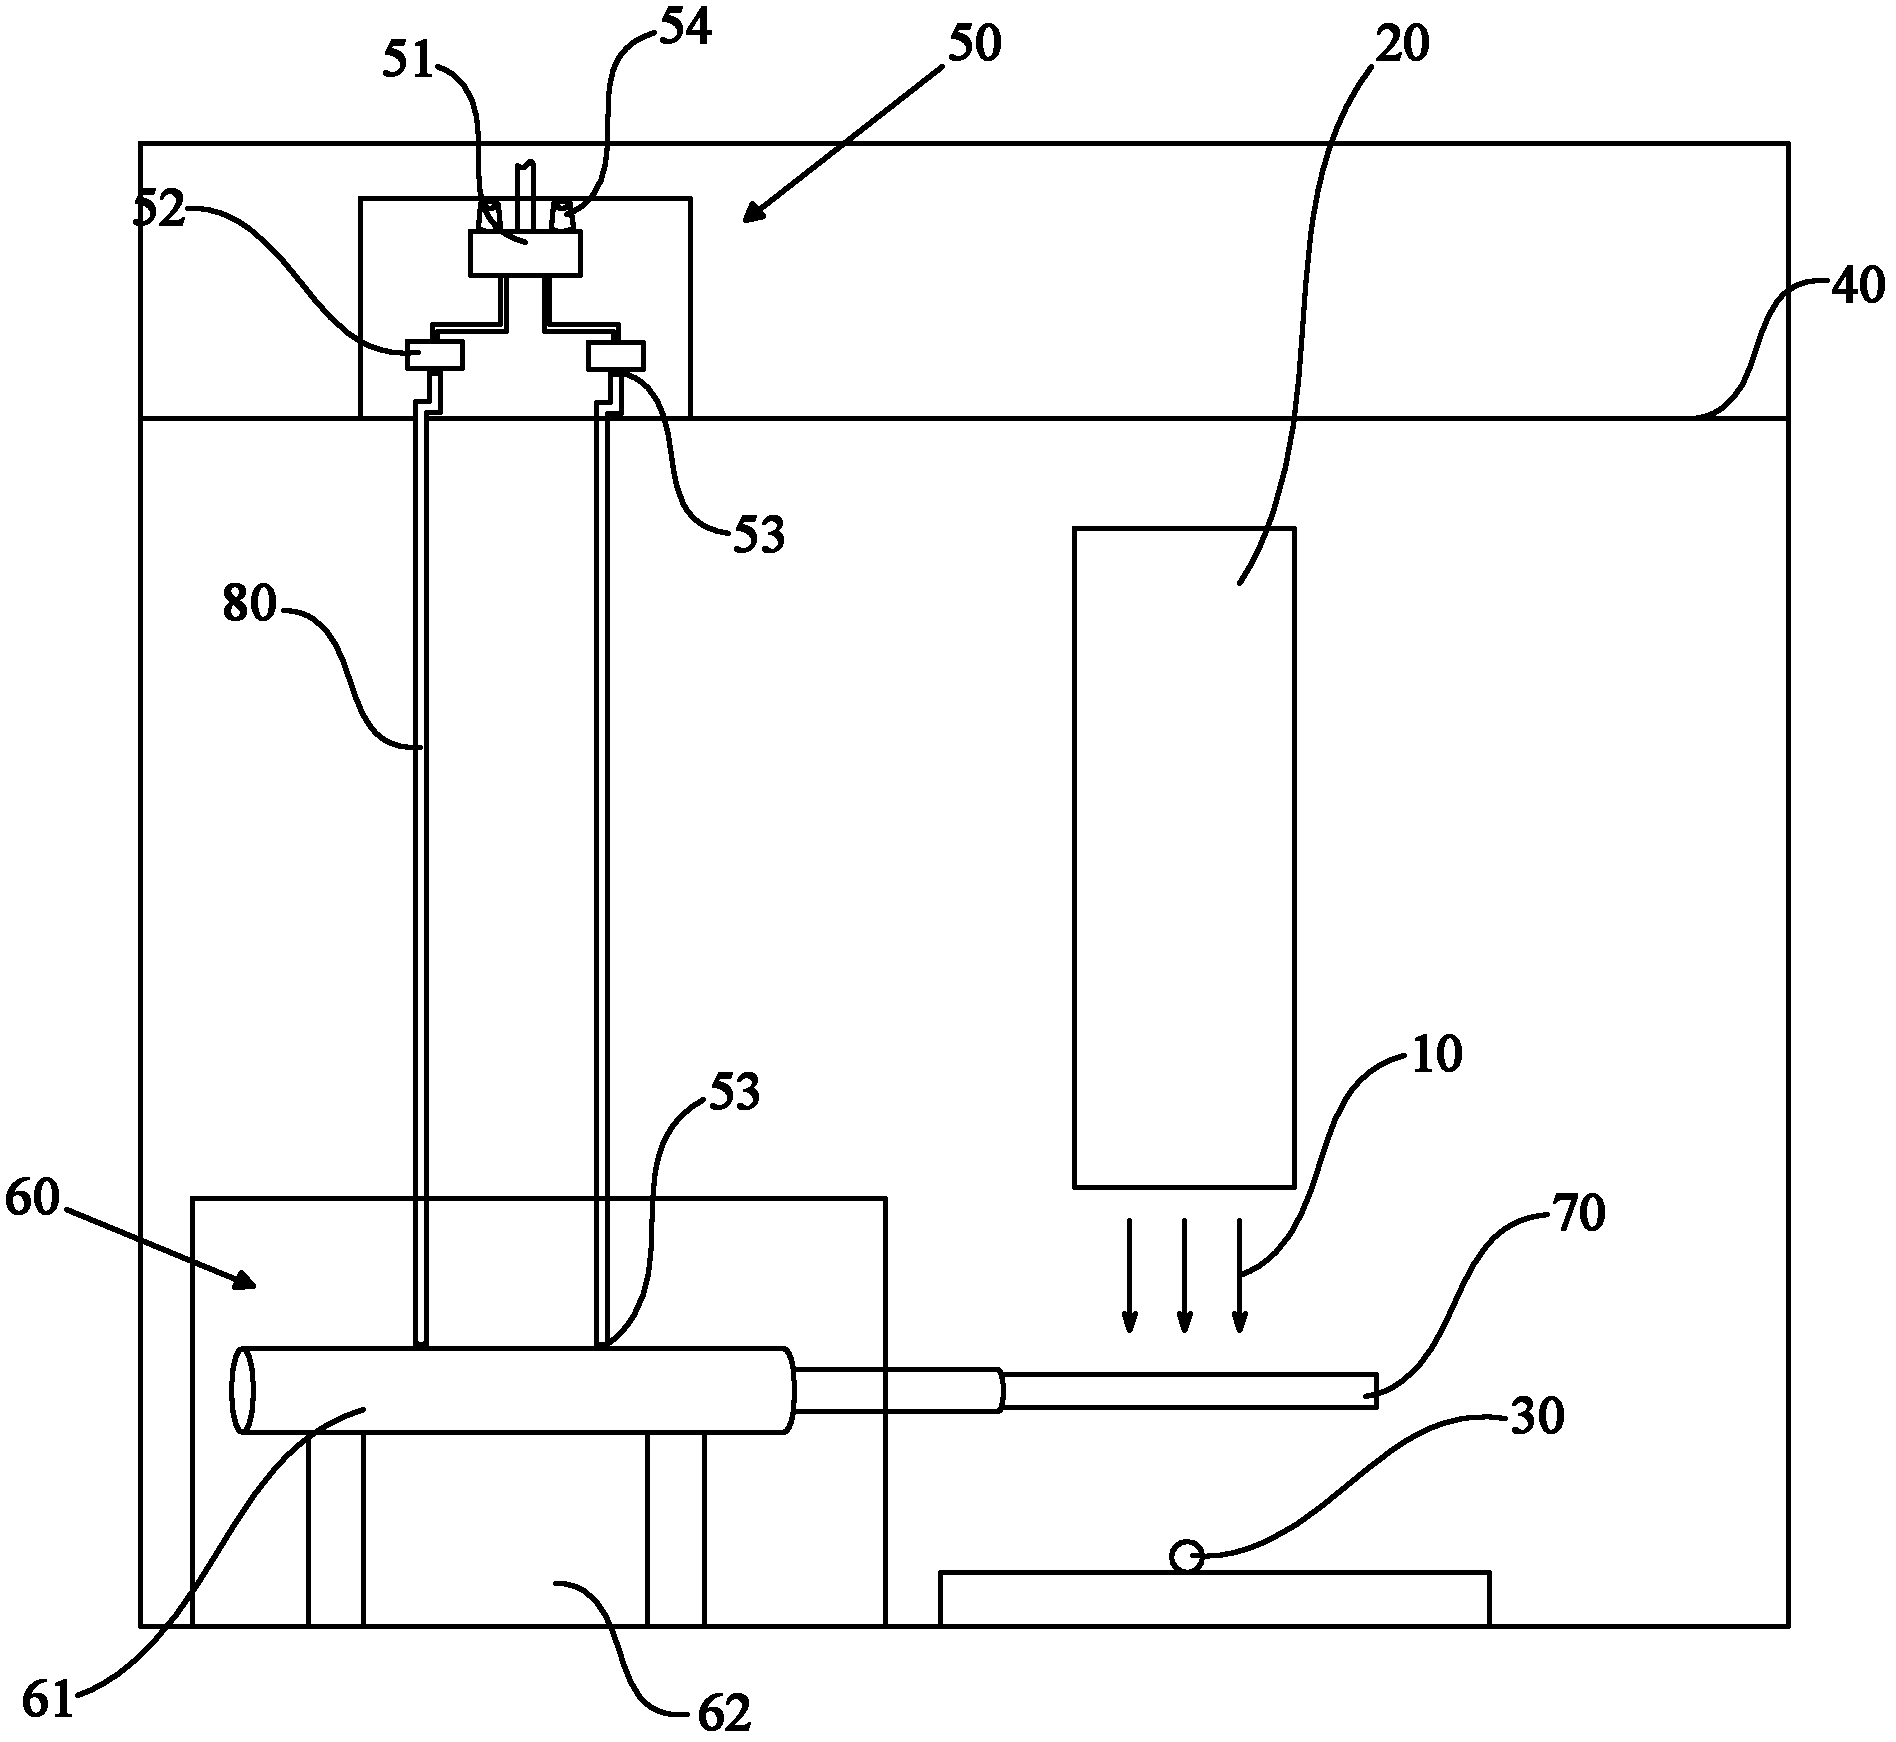 Beam current baffle plate controlling system